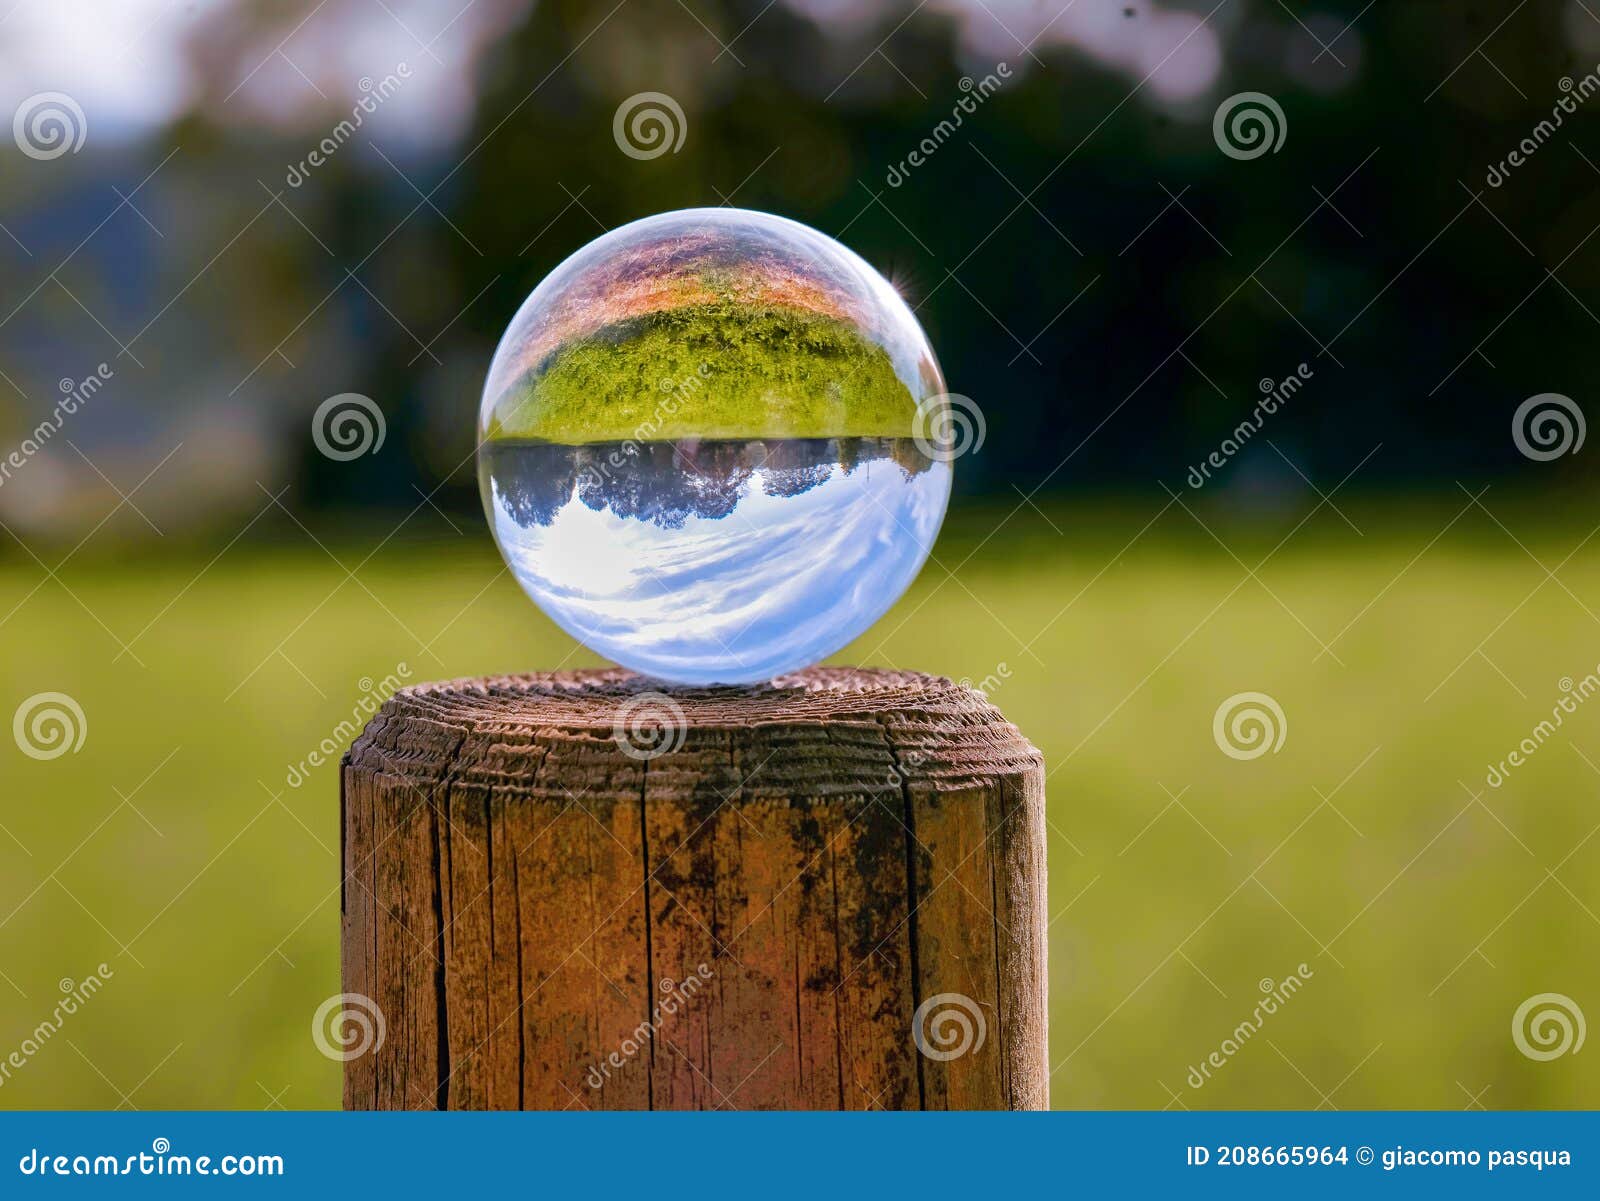 lens ball in nature